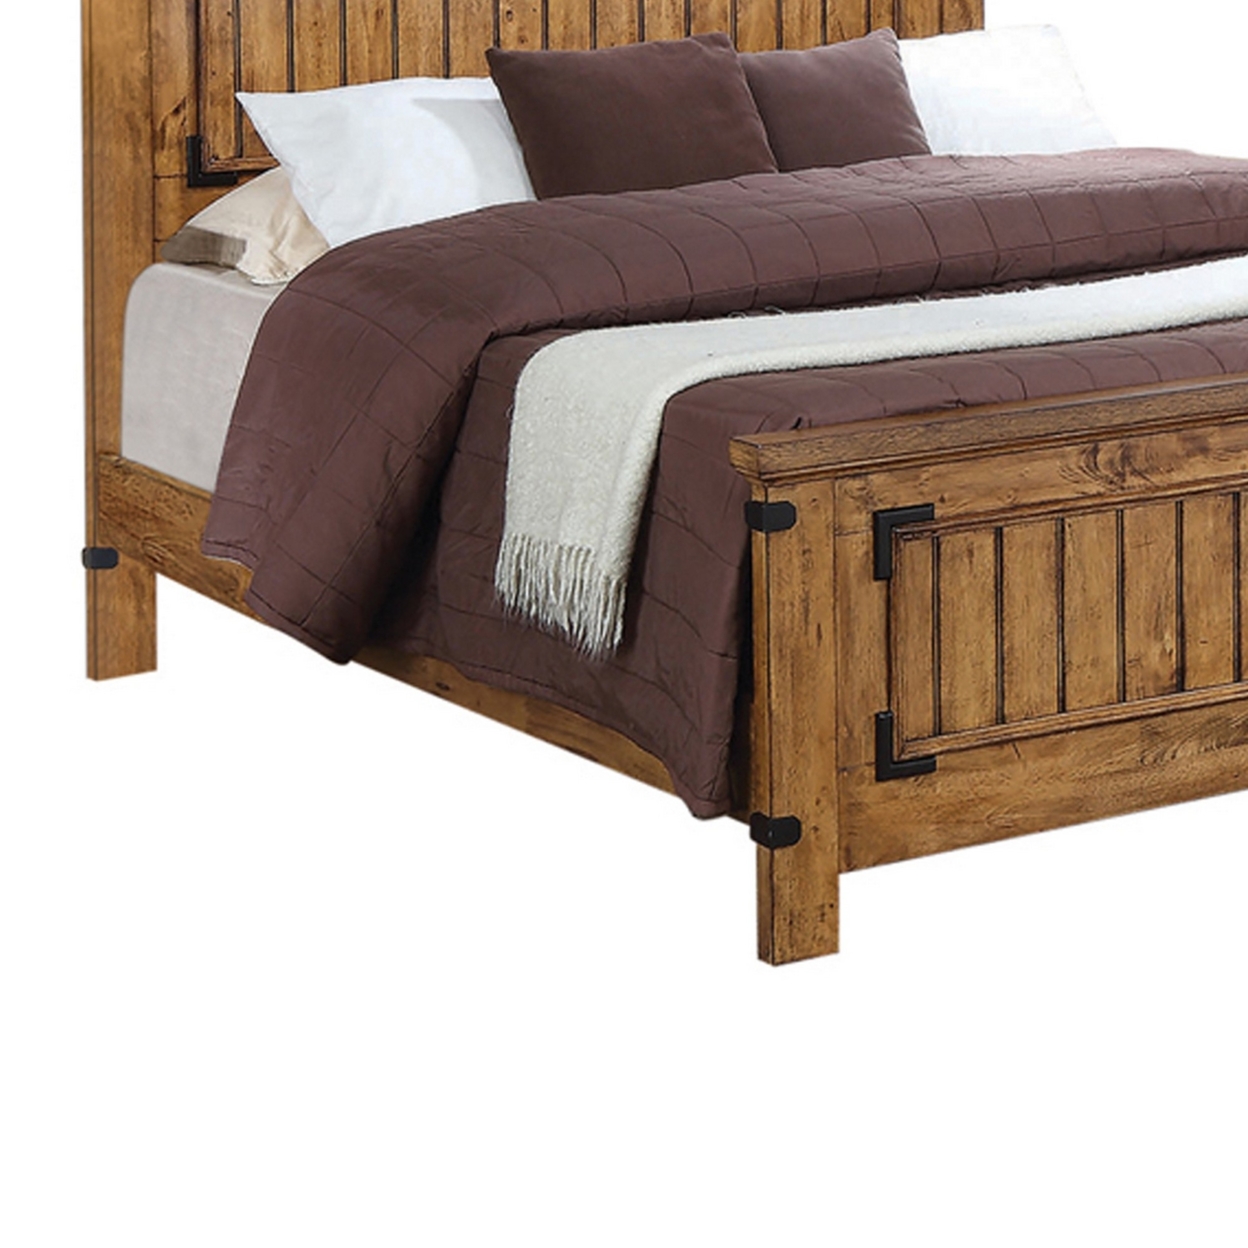 Cottage Style Full Bed Plank Detailing And Metal Accents, Brown- Saltoro Sherpi